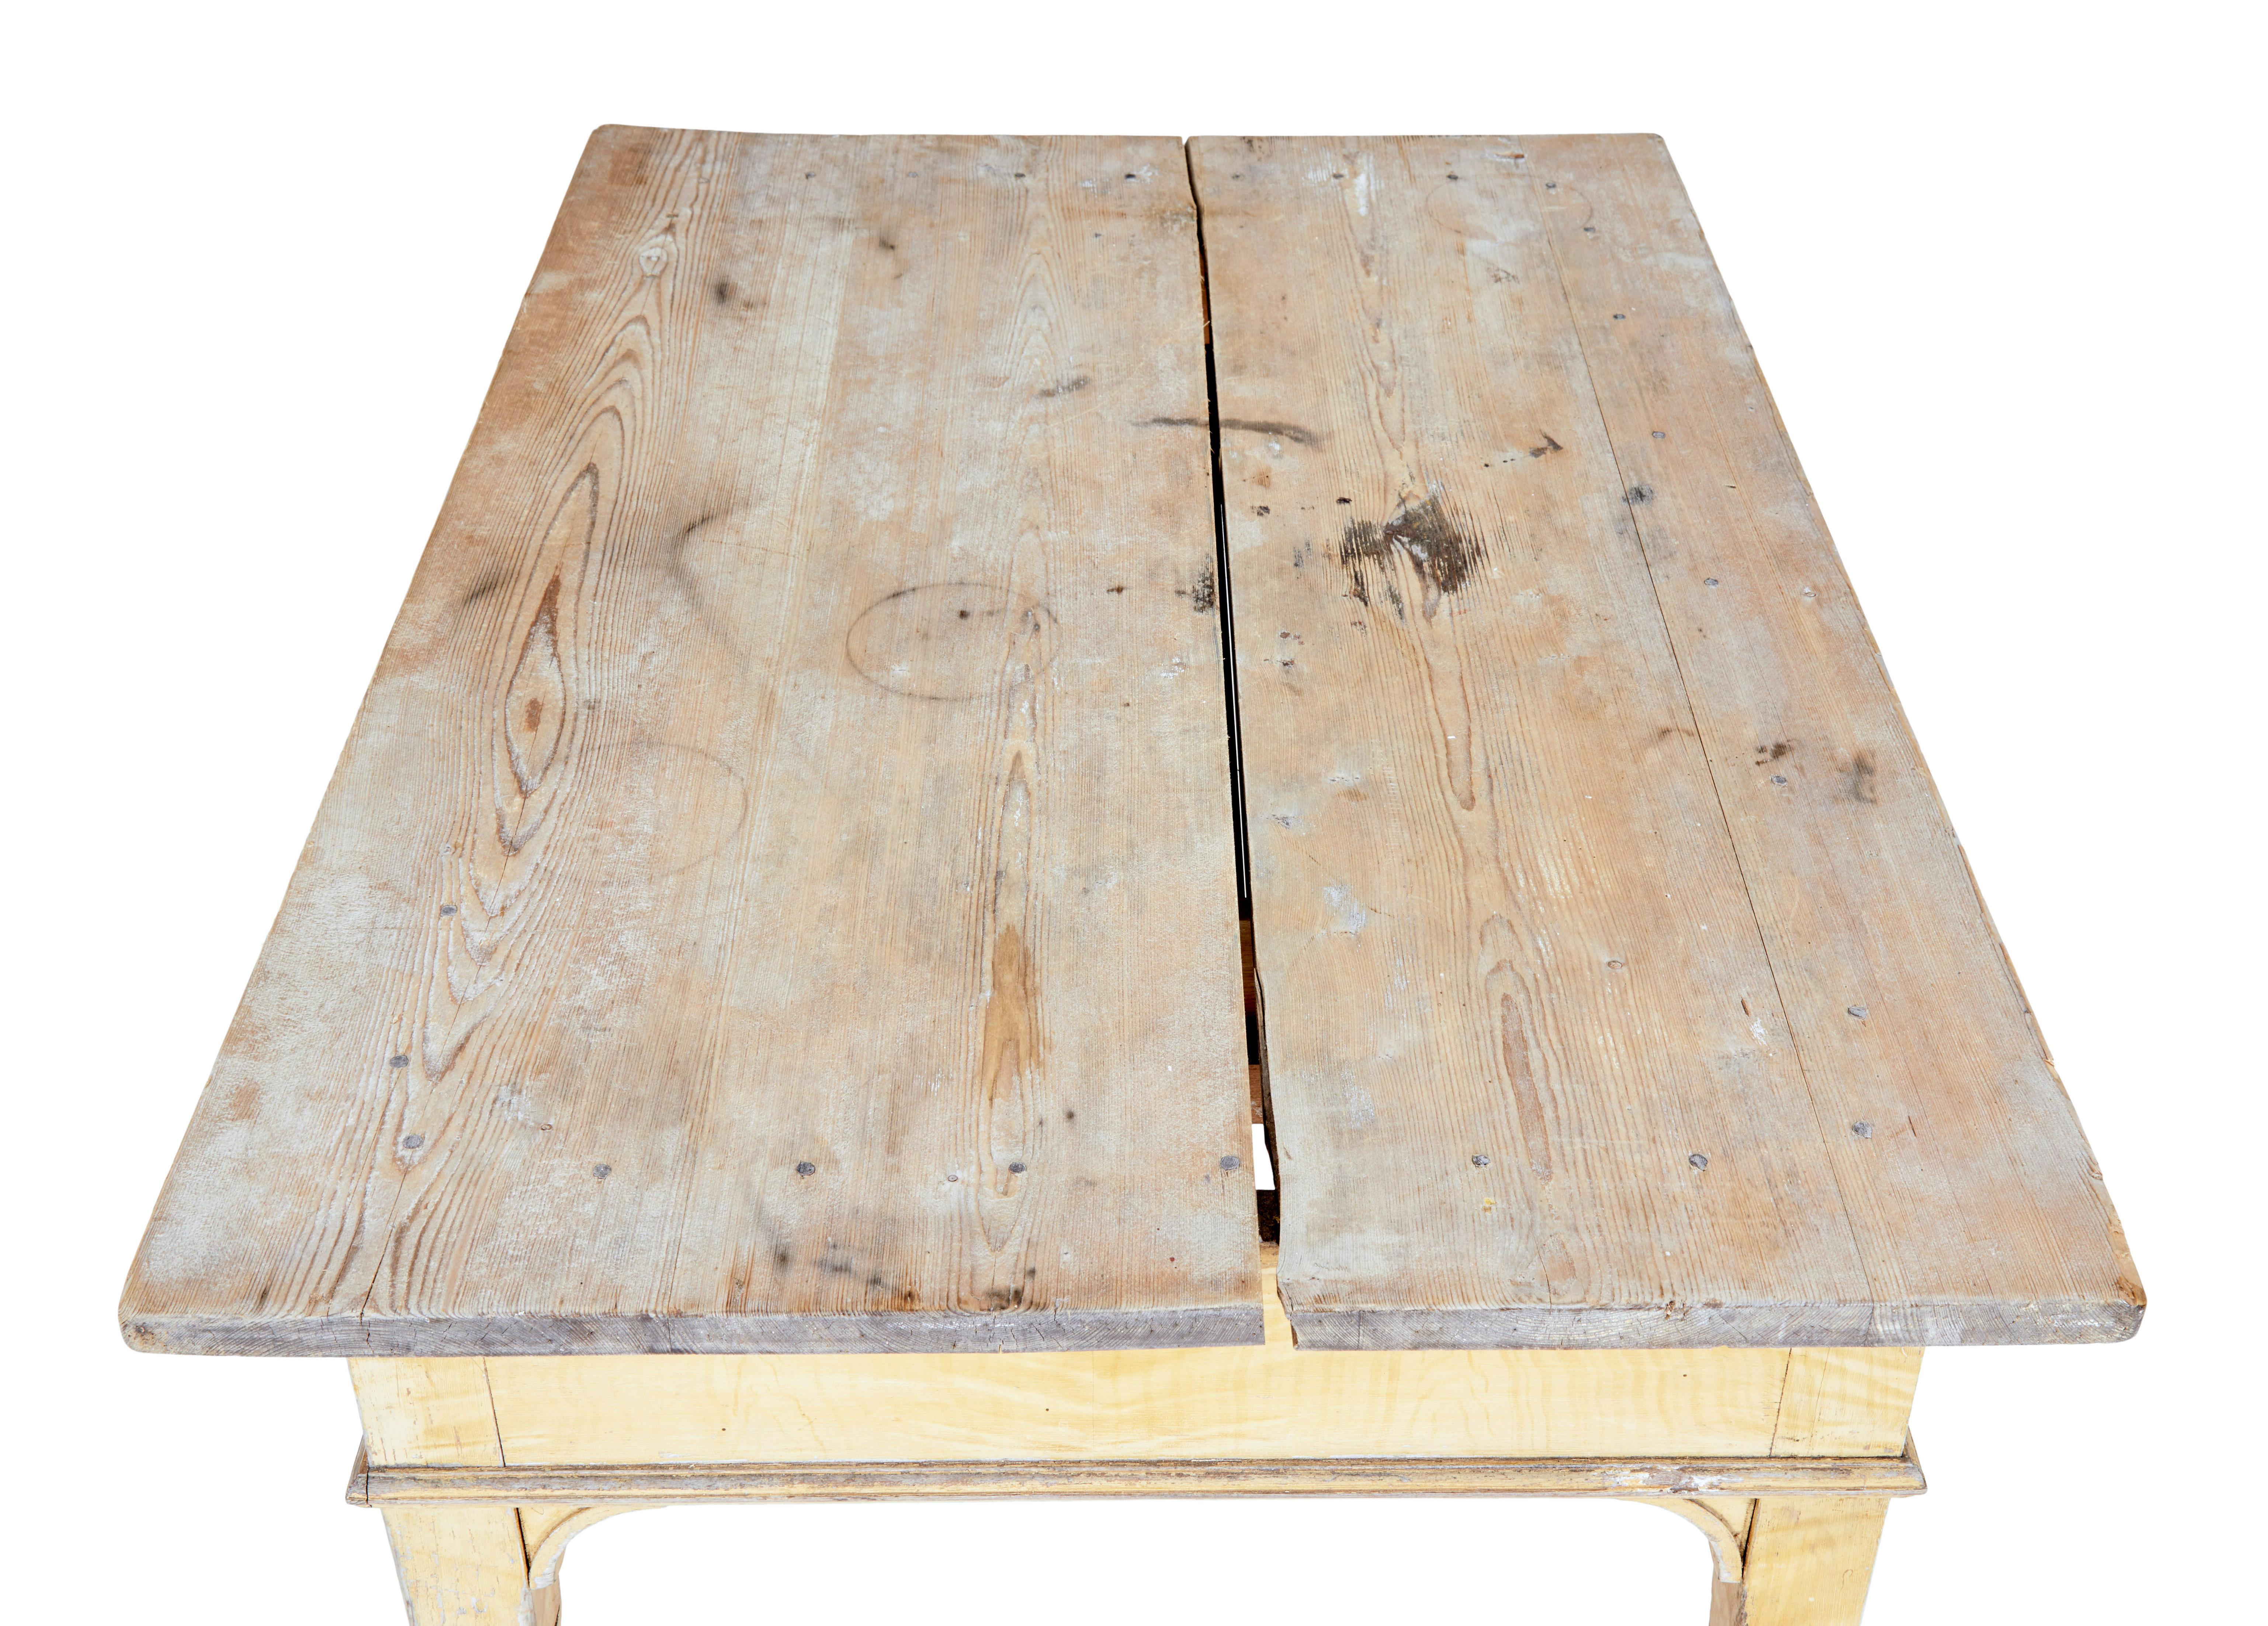 Swedish 19th century painted pine kitchen table circa 1870.

Good quality table with multiple uses around the home, with a knee height of 23.5 inches.  Pine top does have a age split down the centre, this could be closed up removing the top and